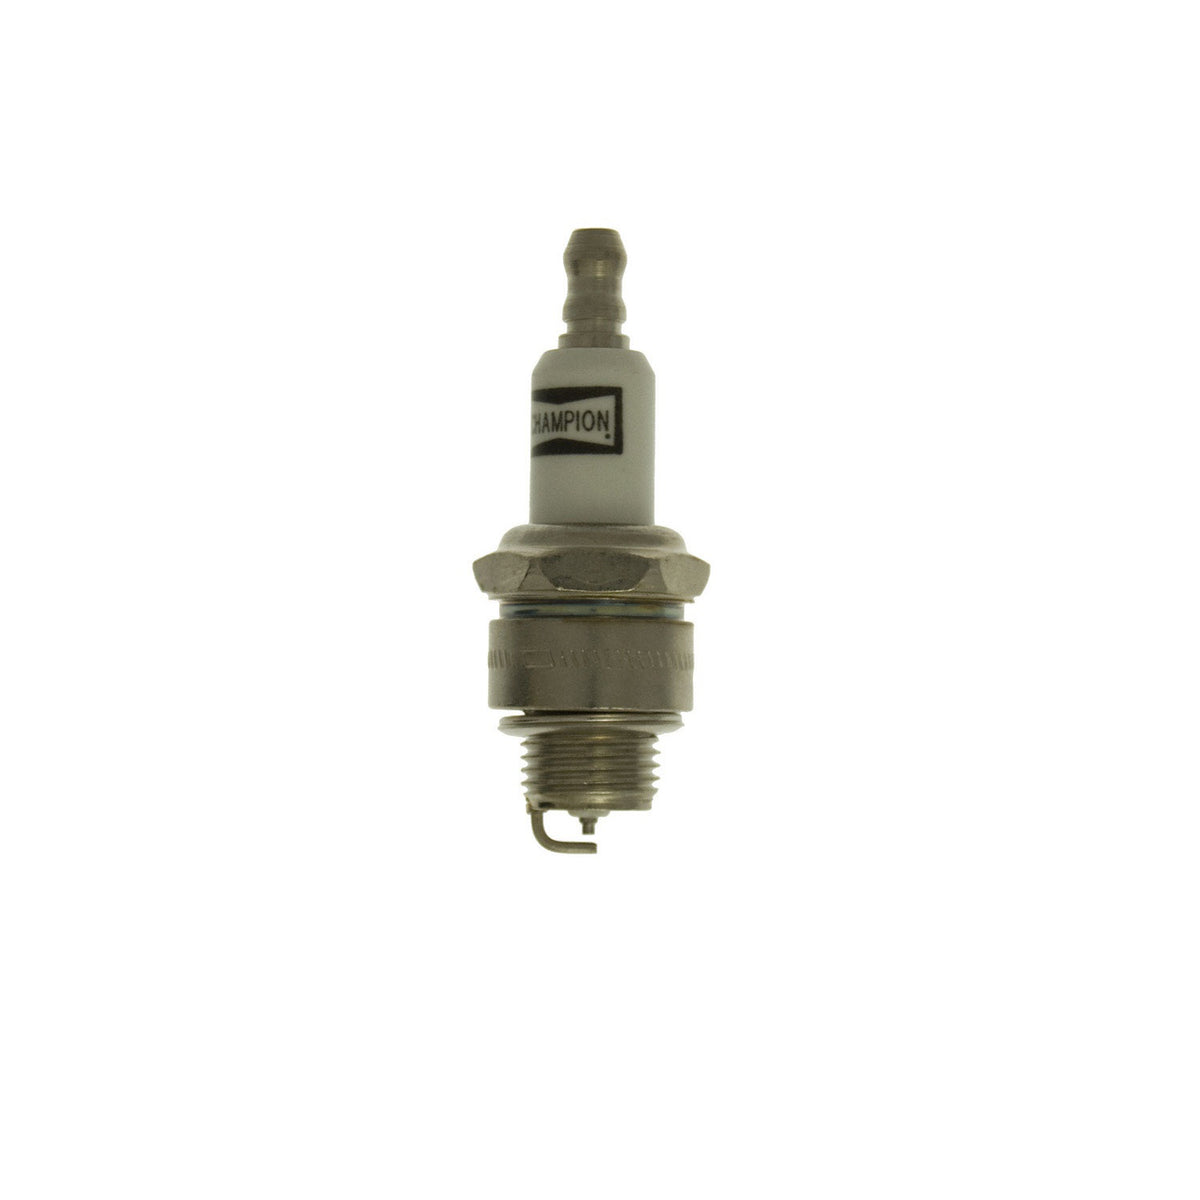 buy engine spark plugs at cheap rate in bulk. wholesale & retail lawn garden power tools store.